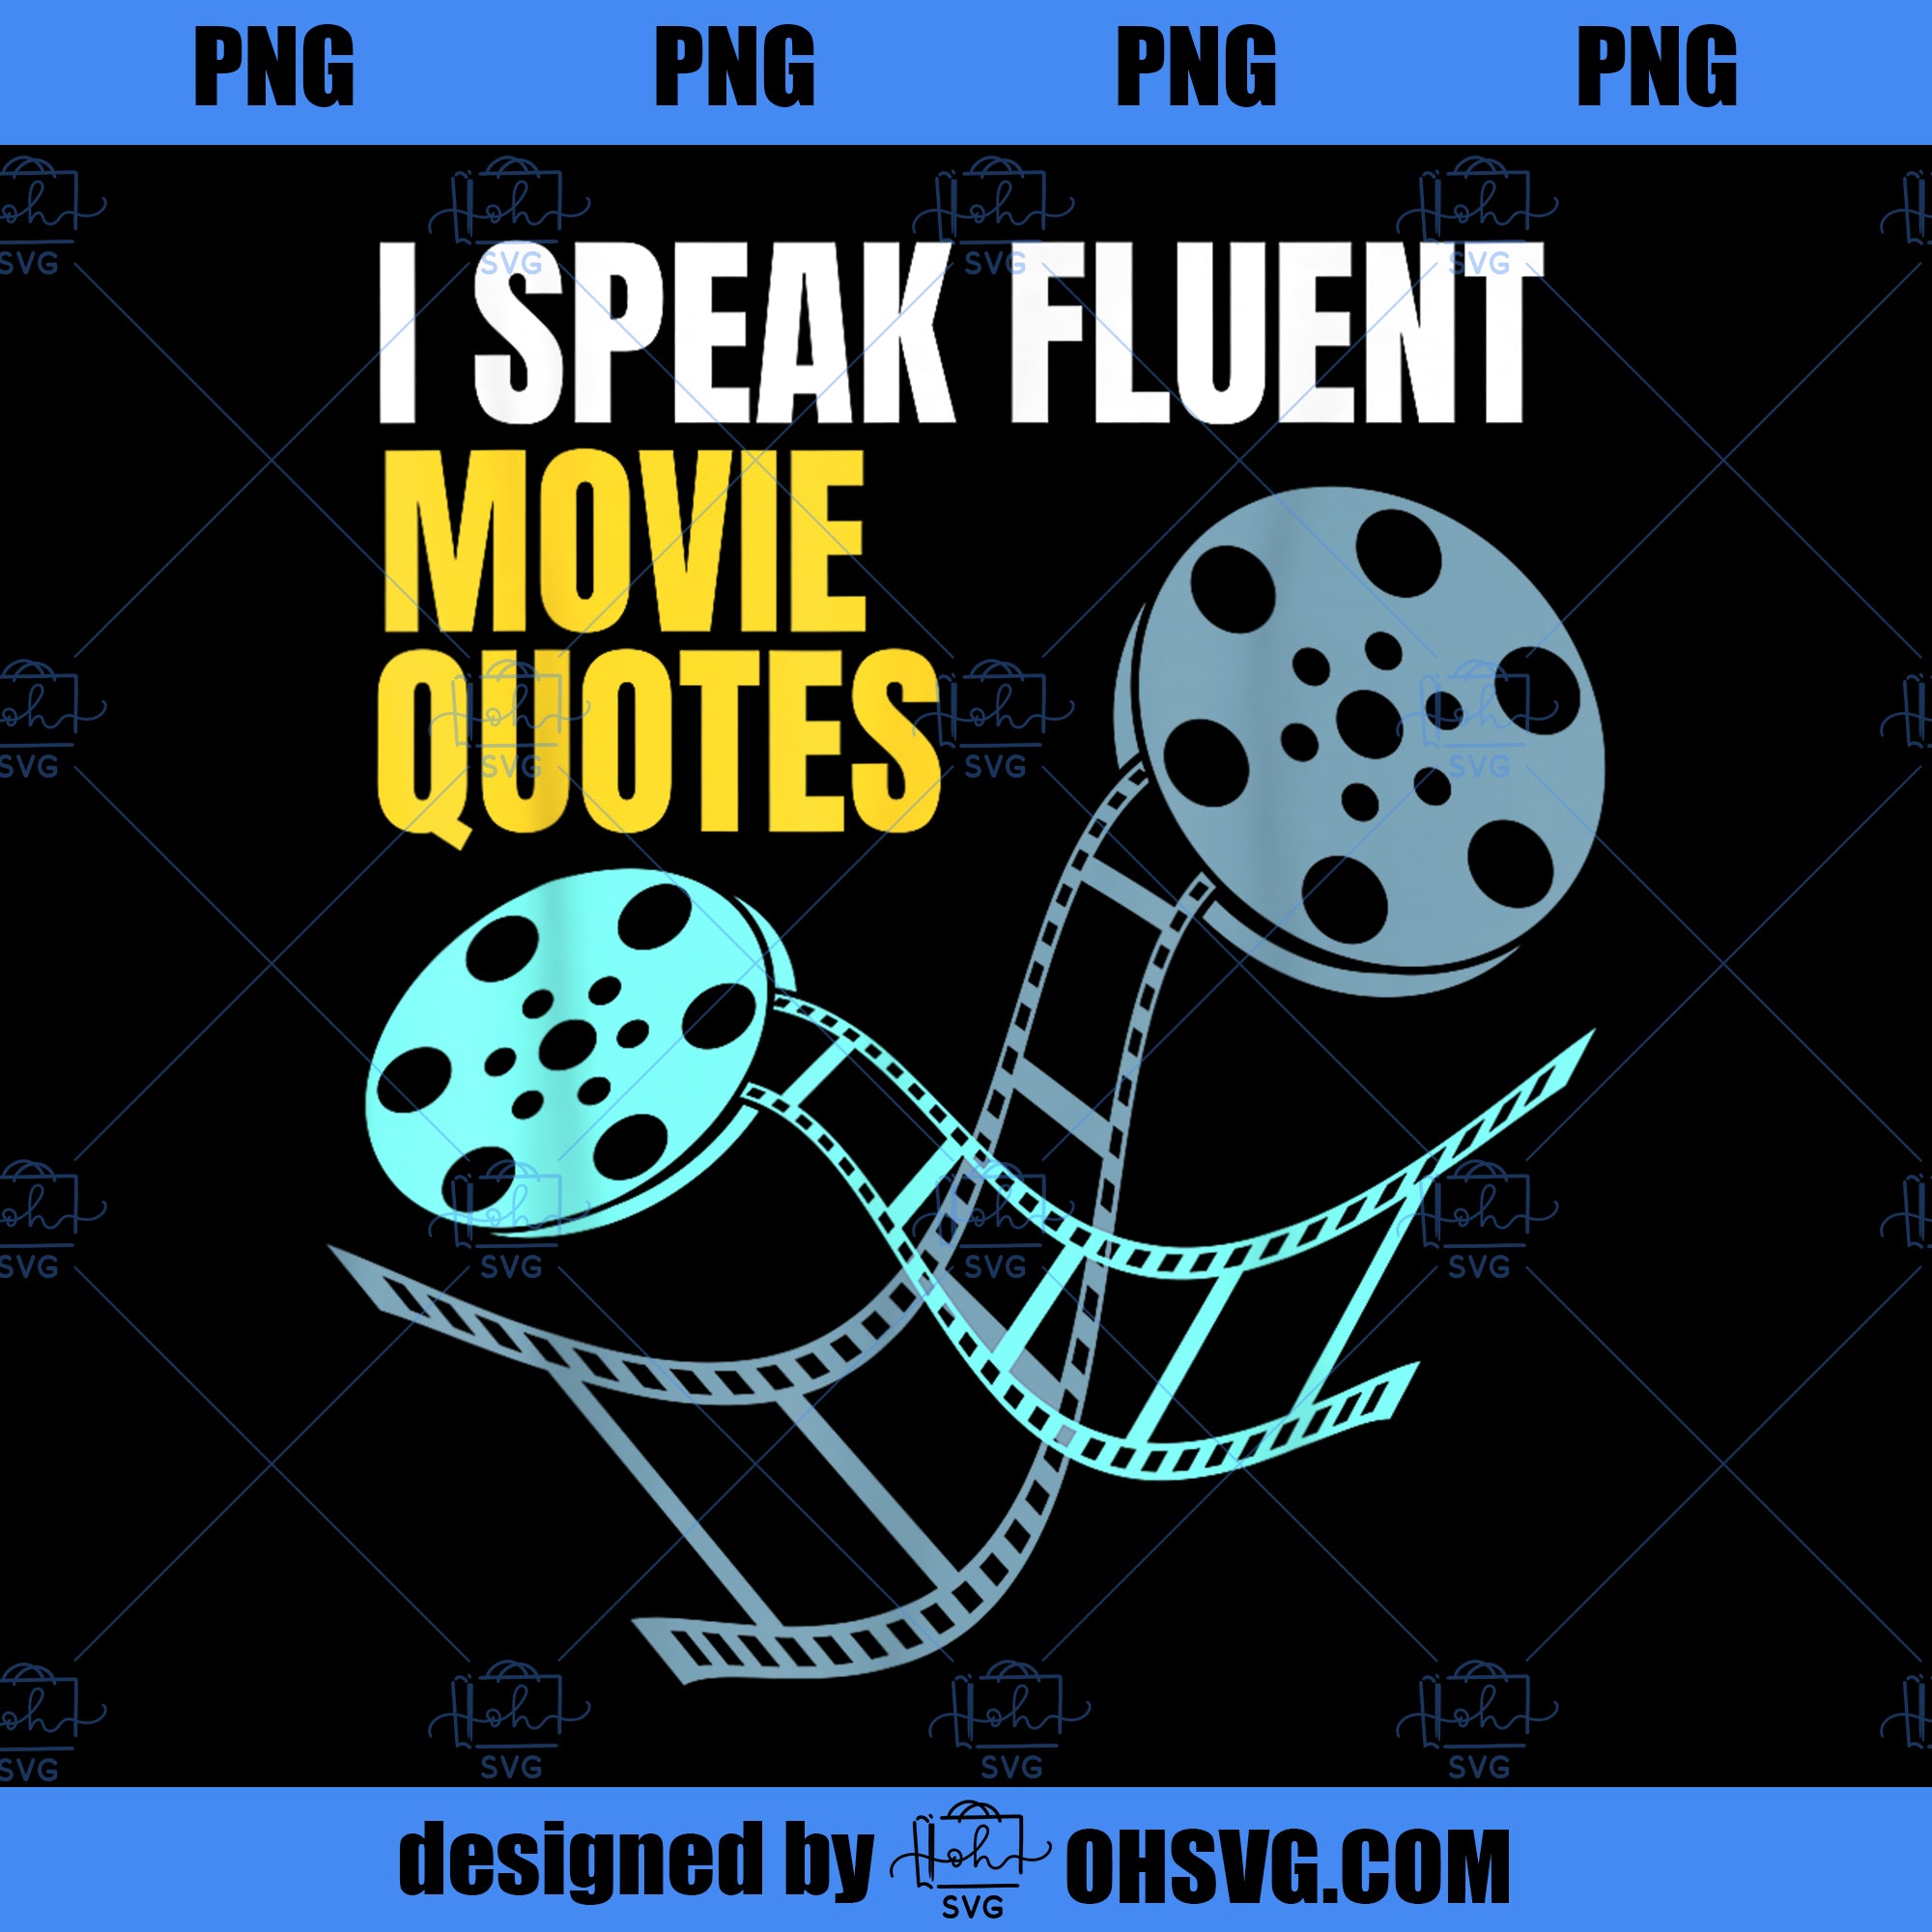 I Speak Fluent Movie Quotes 1 PNG Download, Movies PNG, Fluent Movie PNG